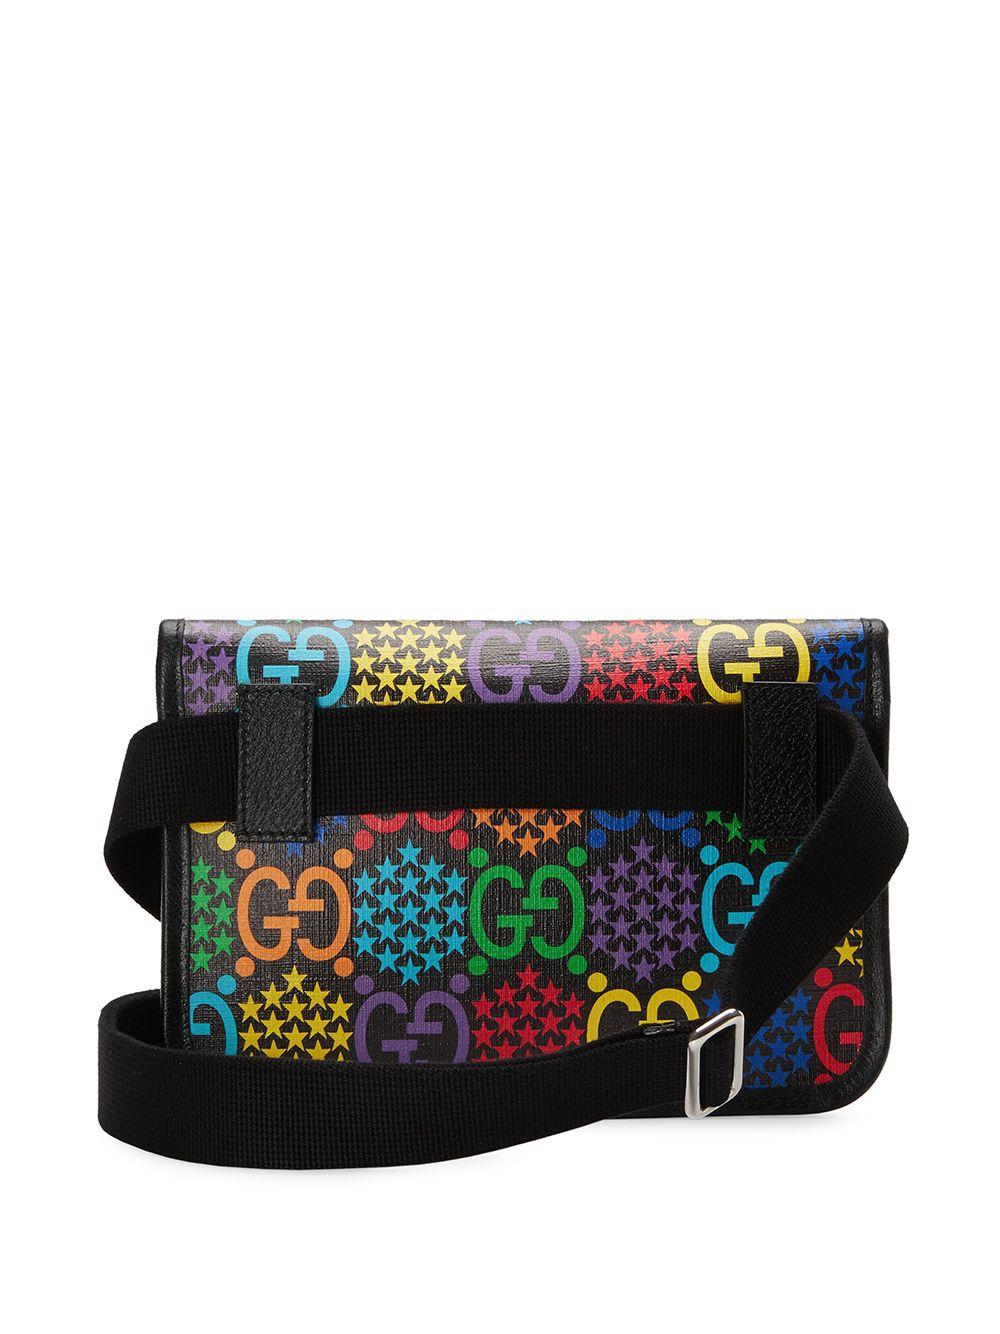 Gucci Leather GG Psychedelic Belt Bag in Black - Lyst